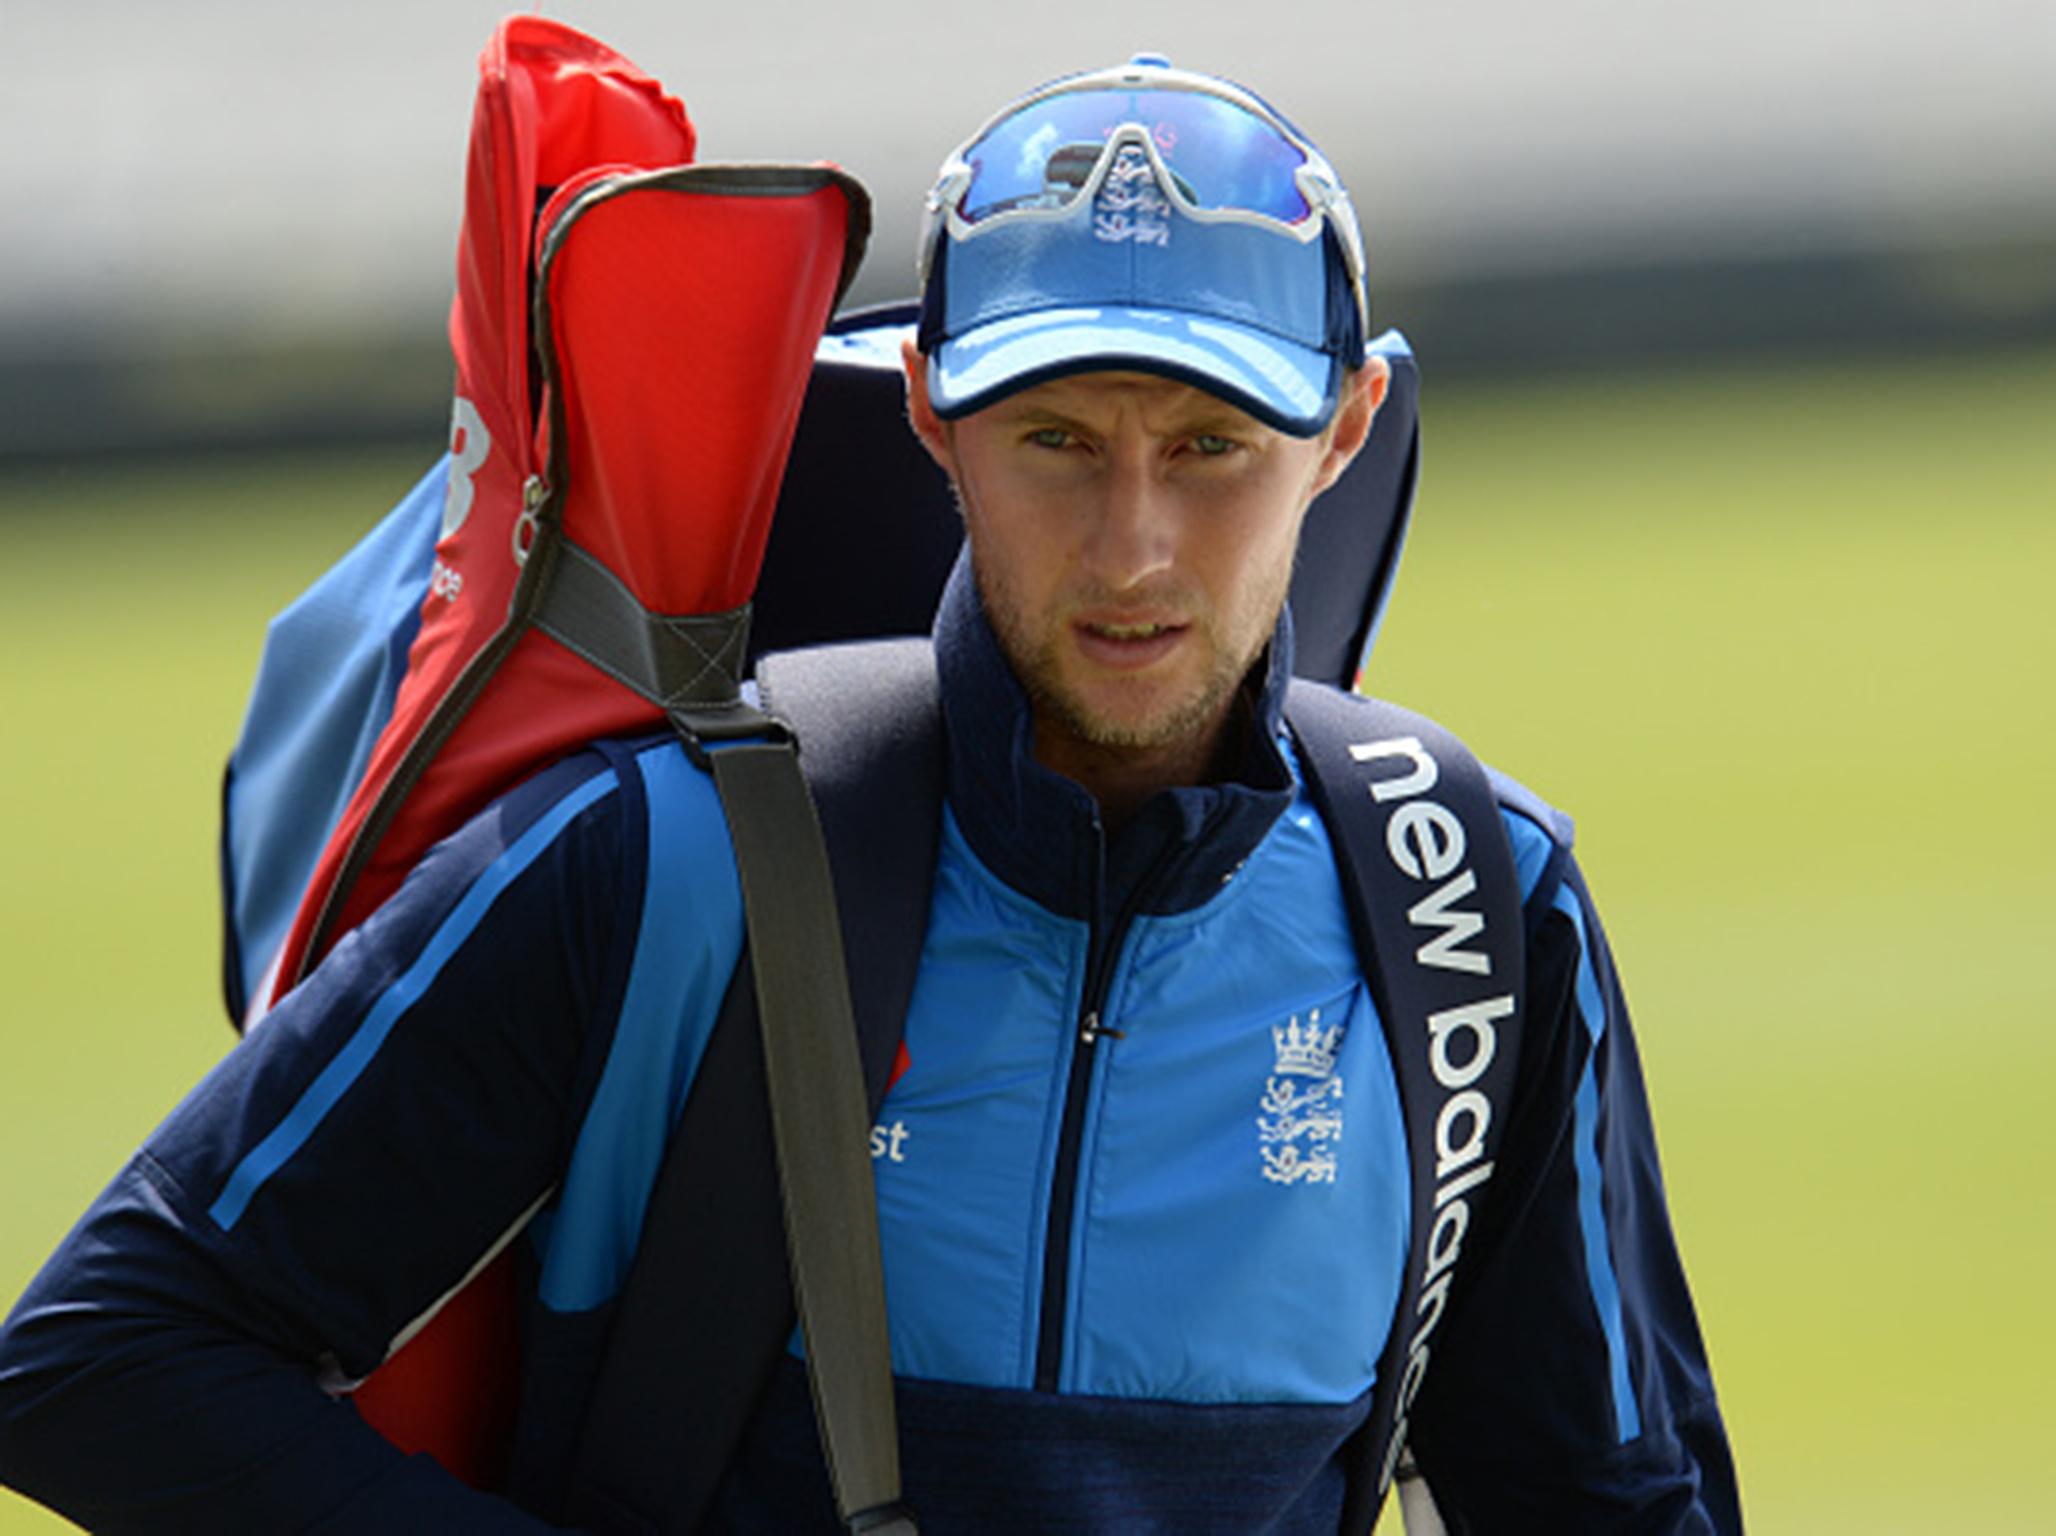 Joe Root has backed his teammates to arrest their current decline